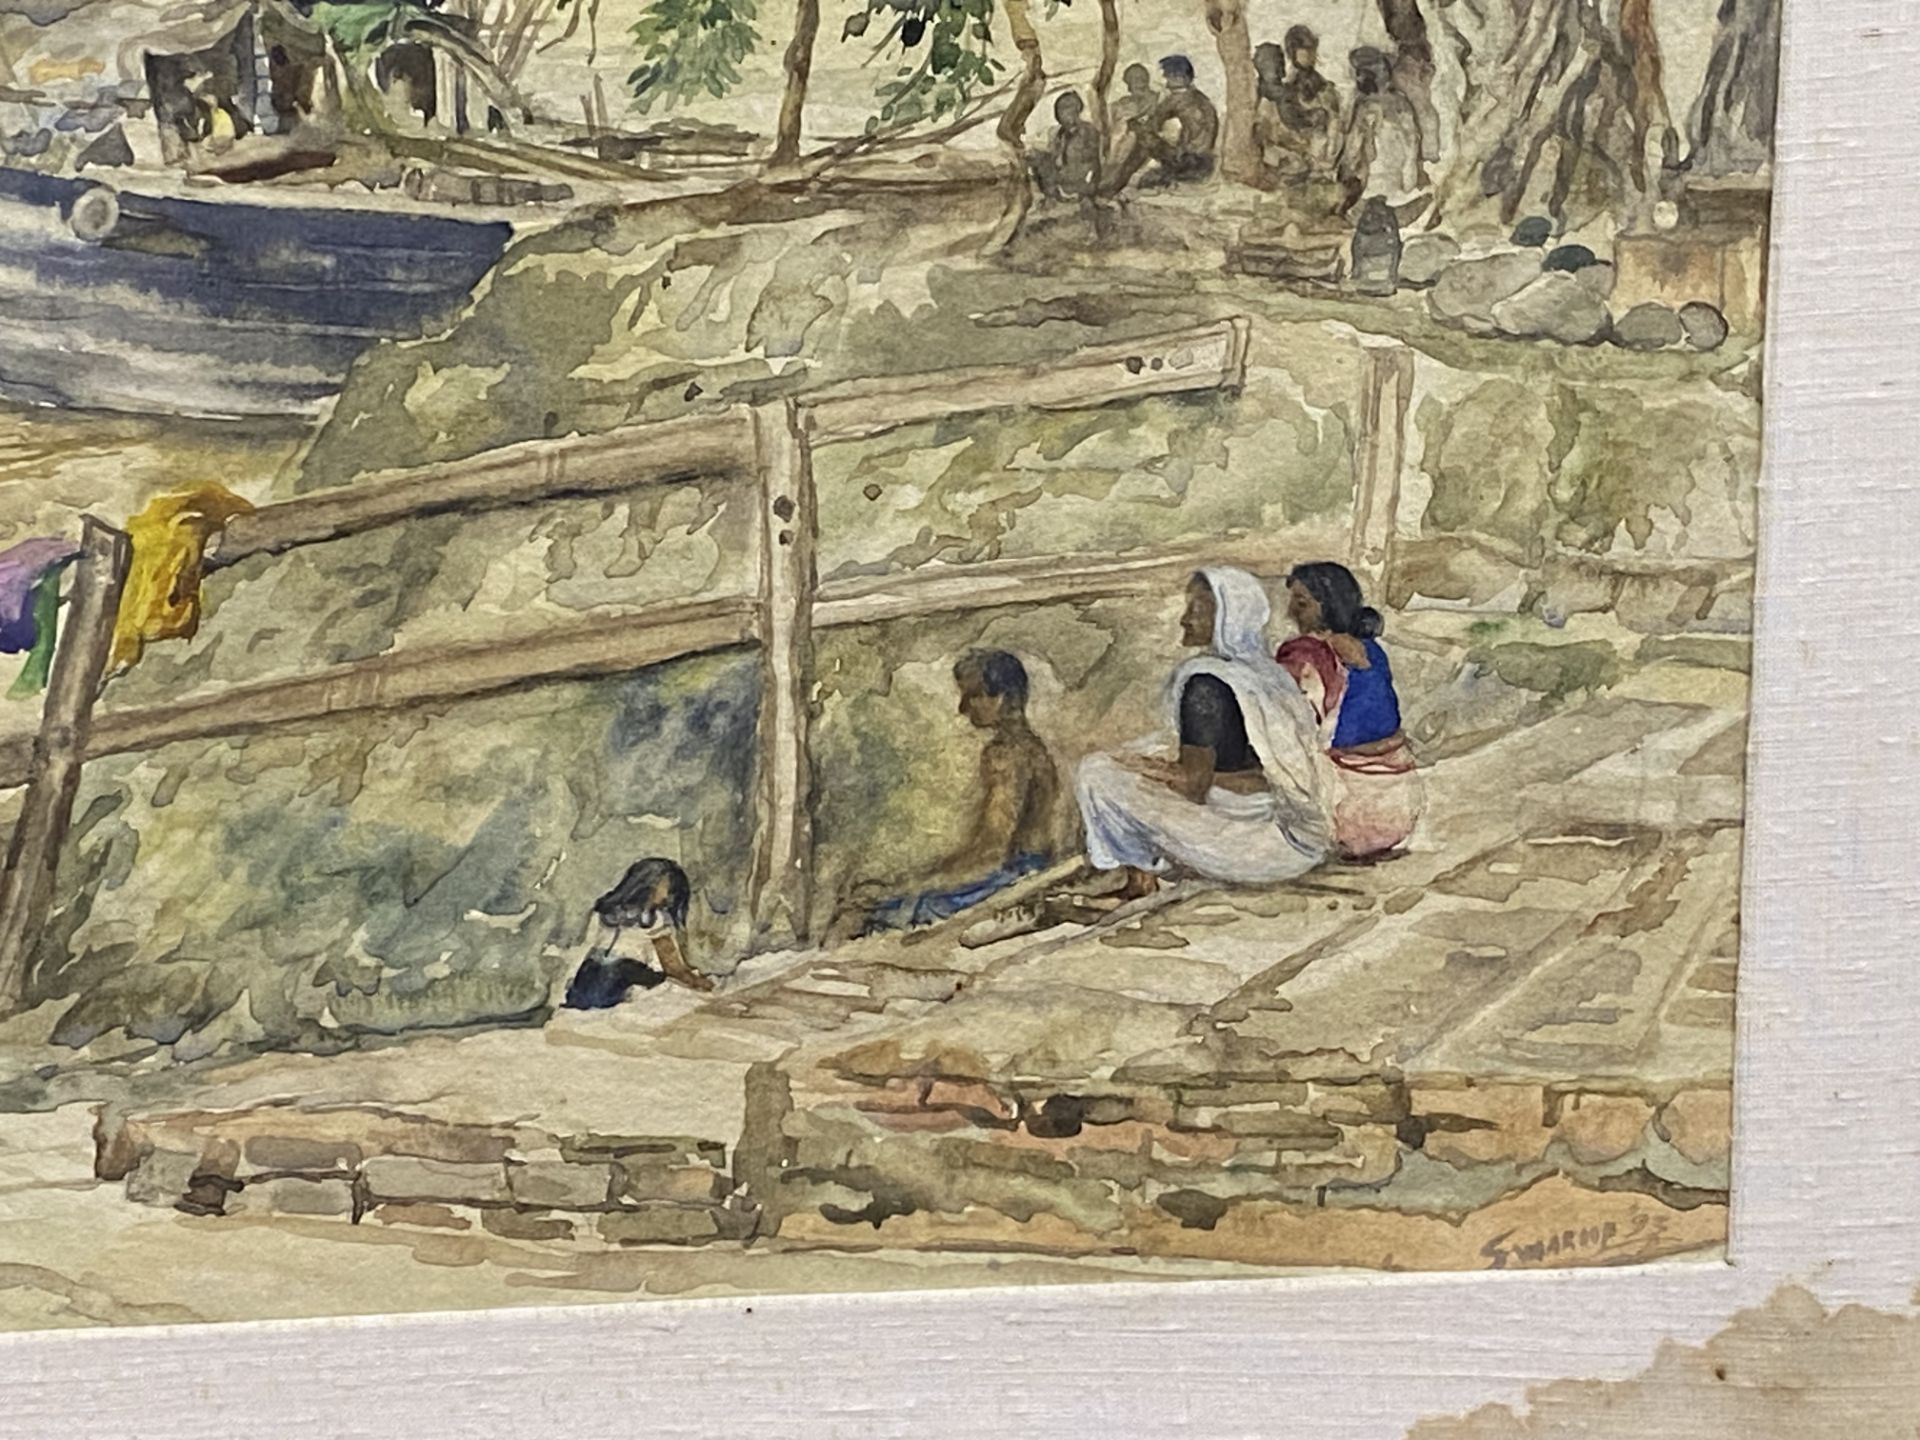 Framed and glazed 19th century watercolour of a river scene in India, signed by artist - Image 3 of 5